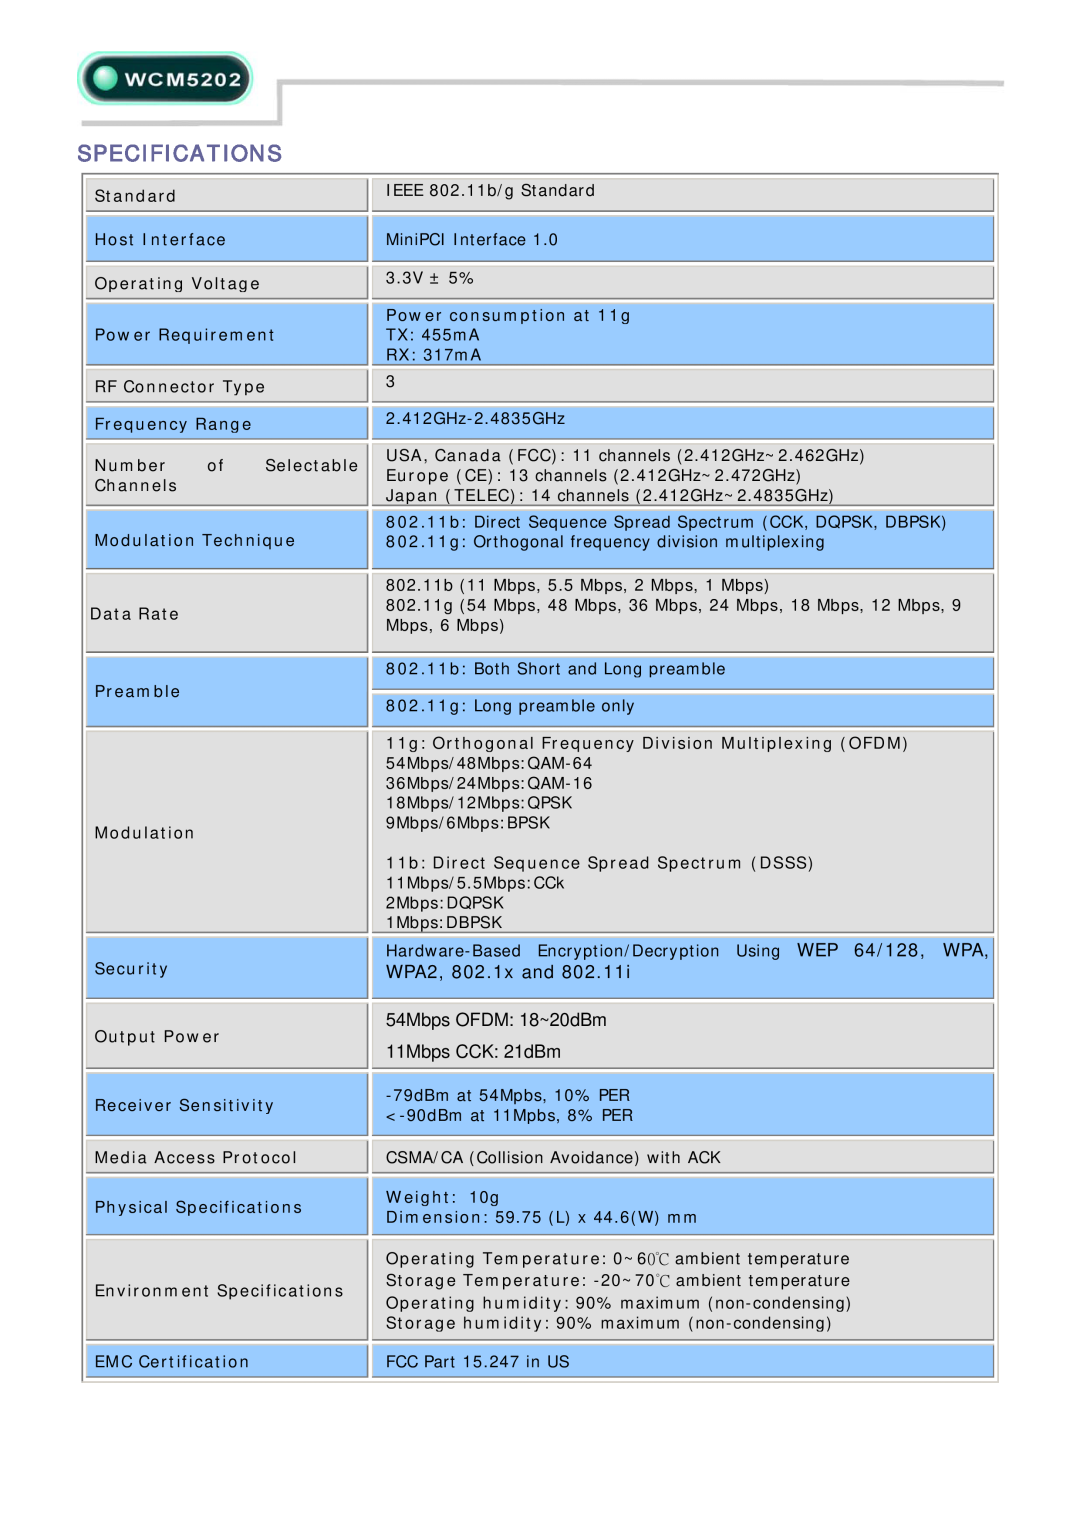 Abocom WCM5202 manual Specifications, WPA2, 802.1x and, 54Mbps OFDM 18~20dBm 11Mbps CCK 21dBm 